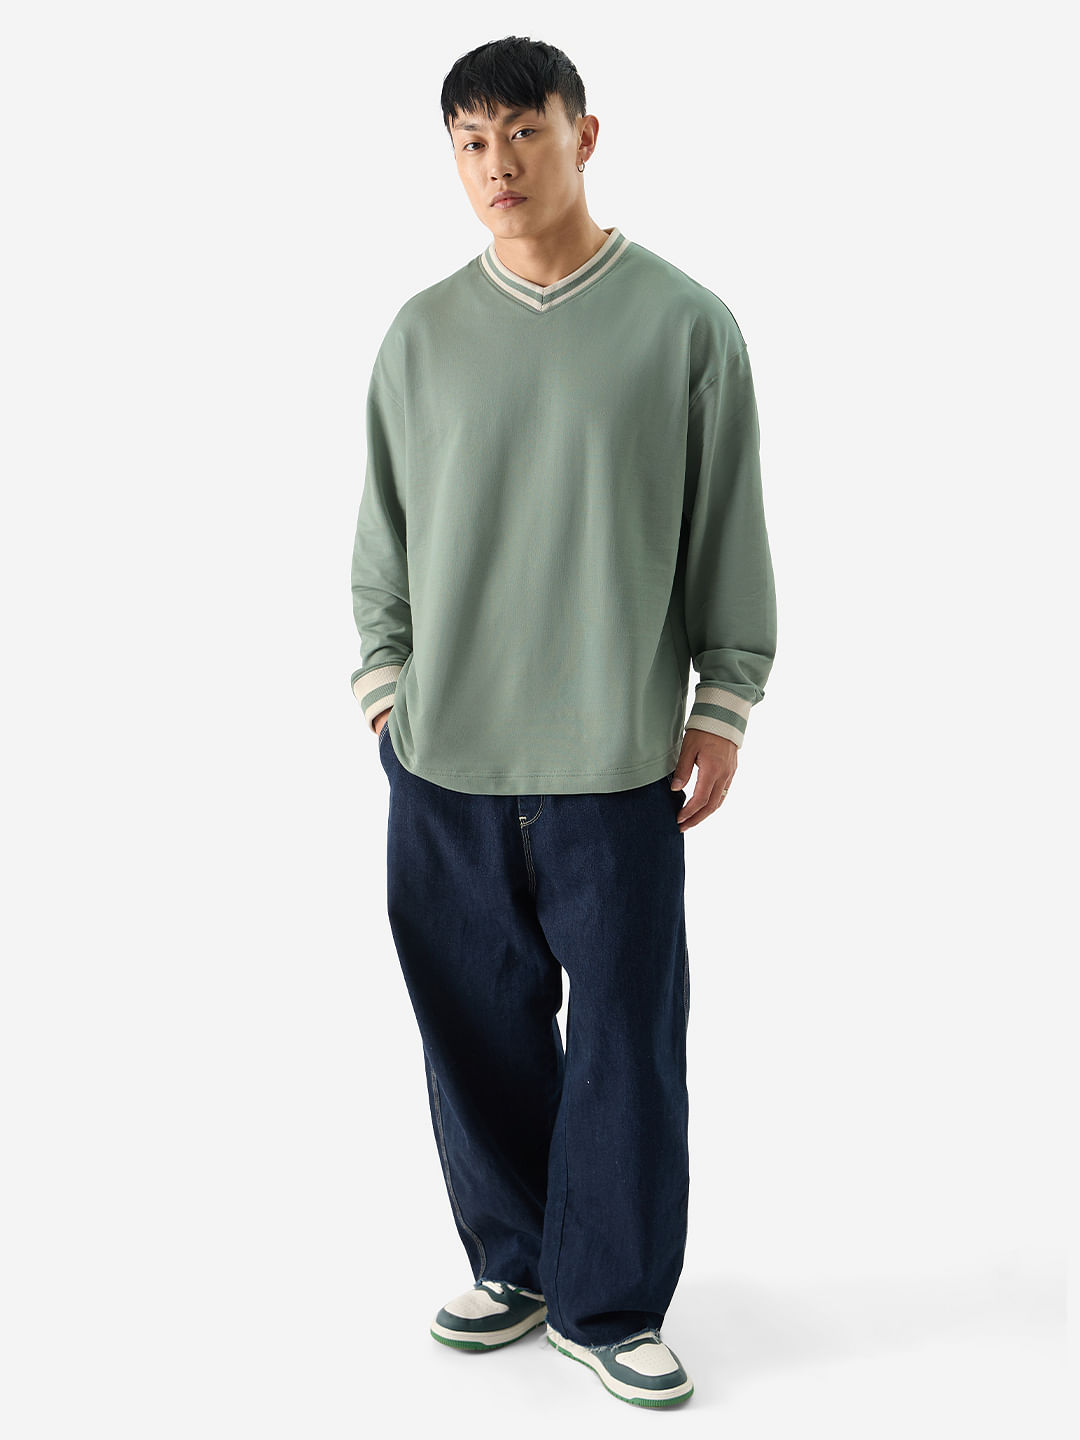 Buy Solids: Sage Green Oversized Full Sleeve T-Shirts Online